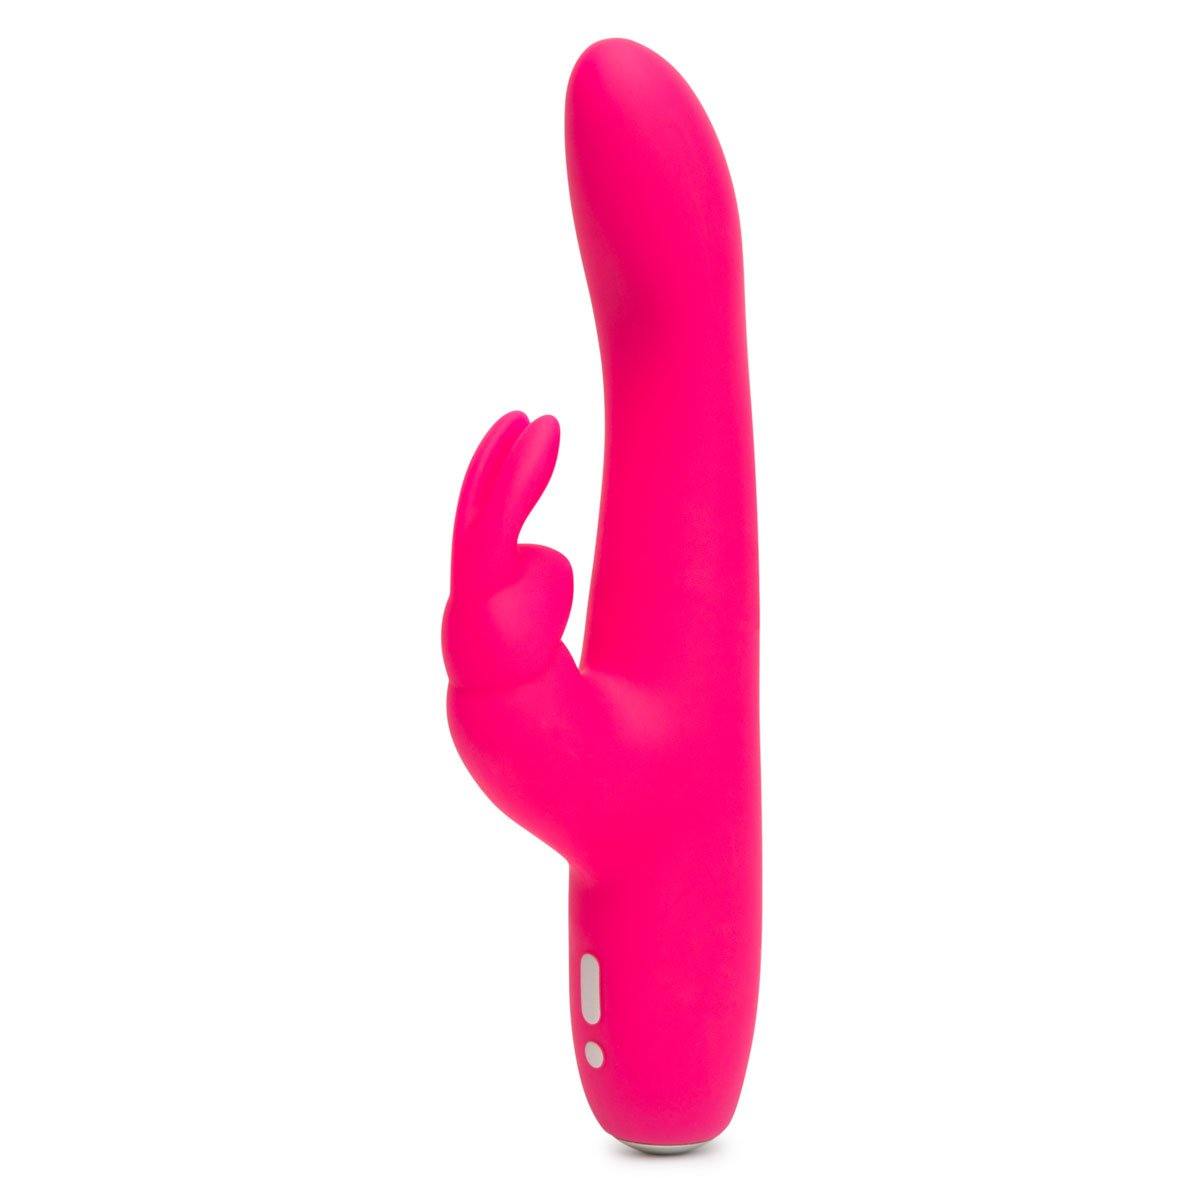 Happy Rabbit Slimline Curve Pink - Buy At Luxury Toy X - Free 3-Day Shipping